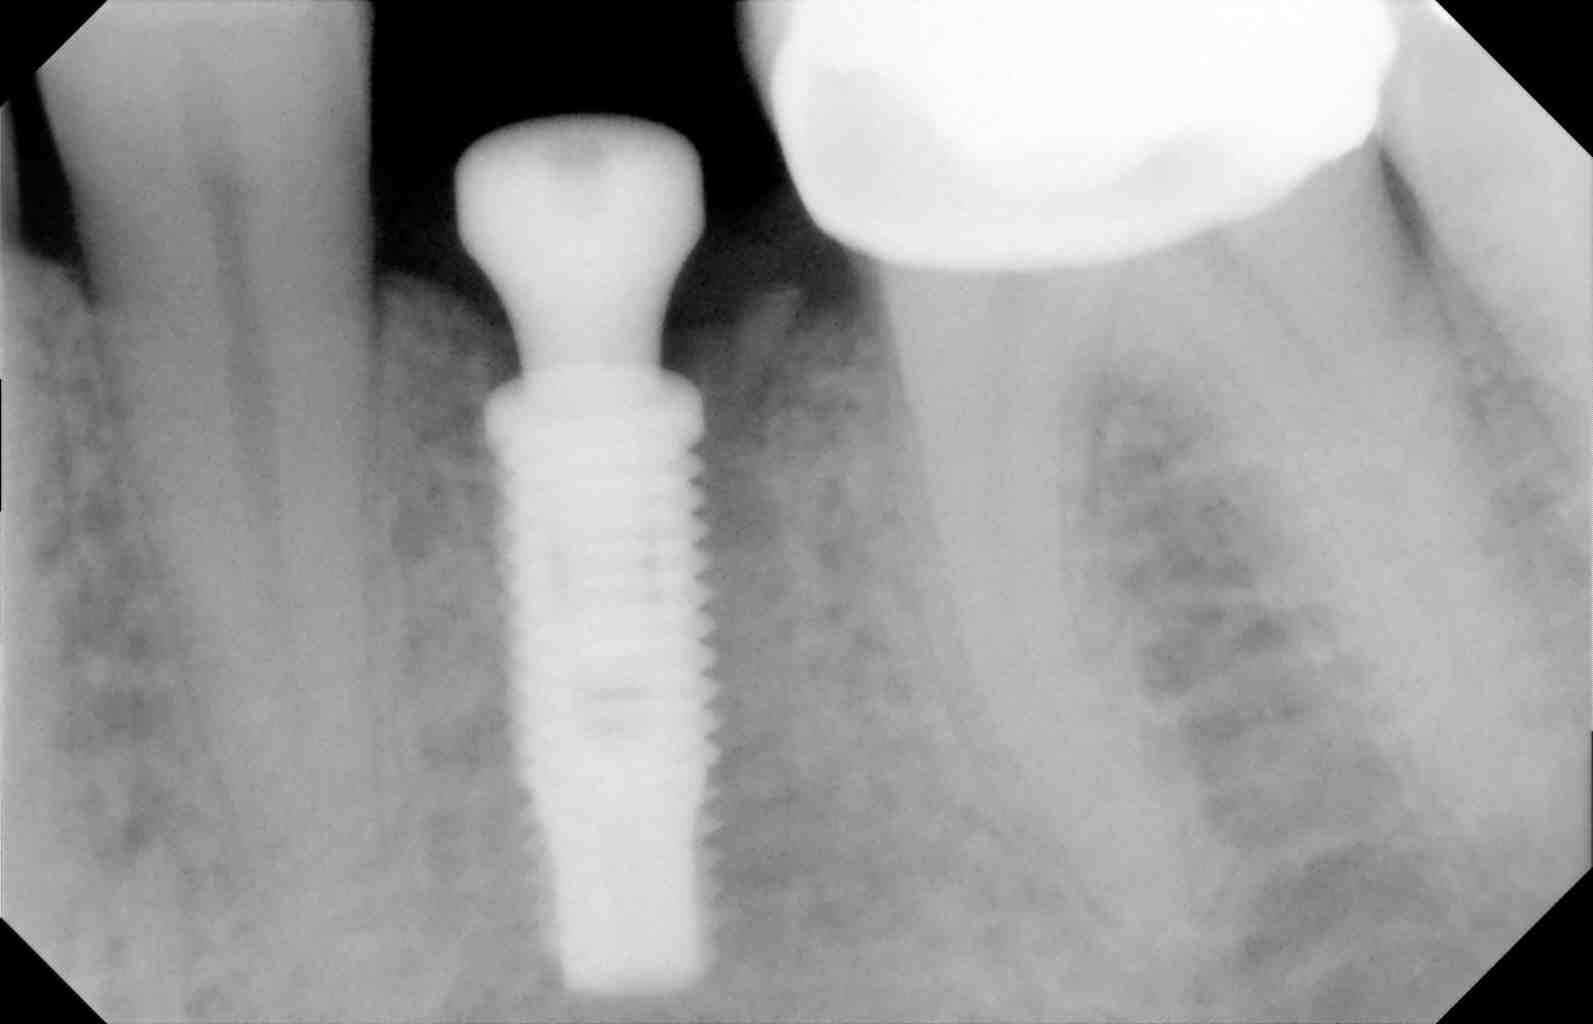 dental implant in place during healing phase